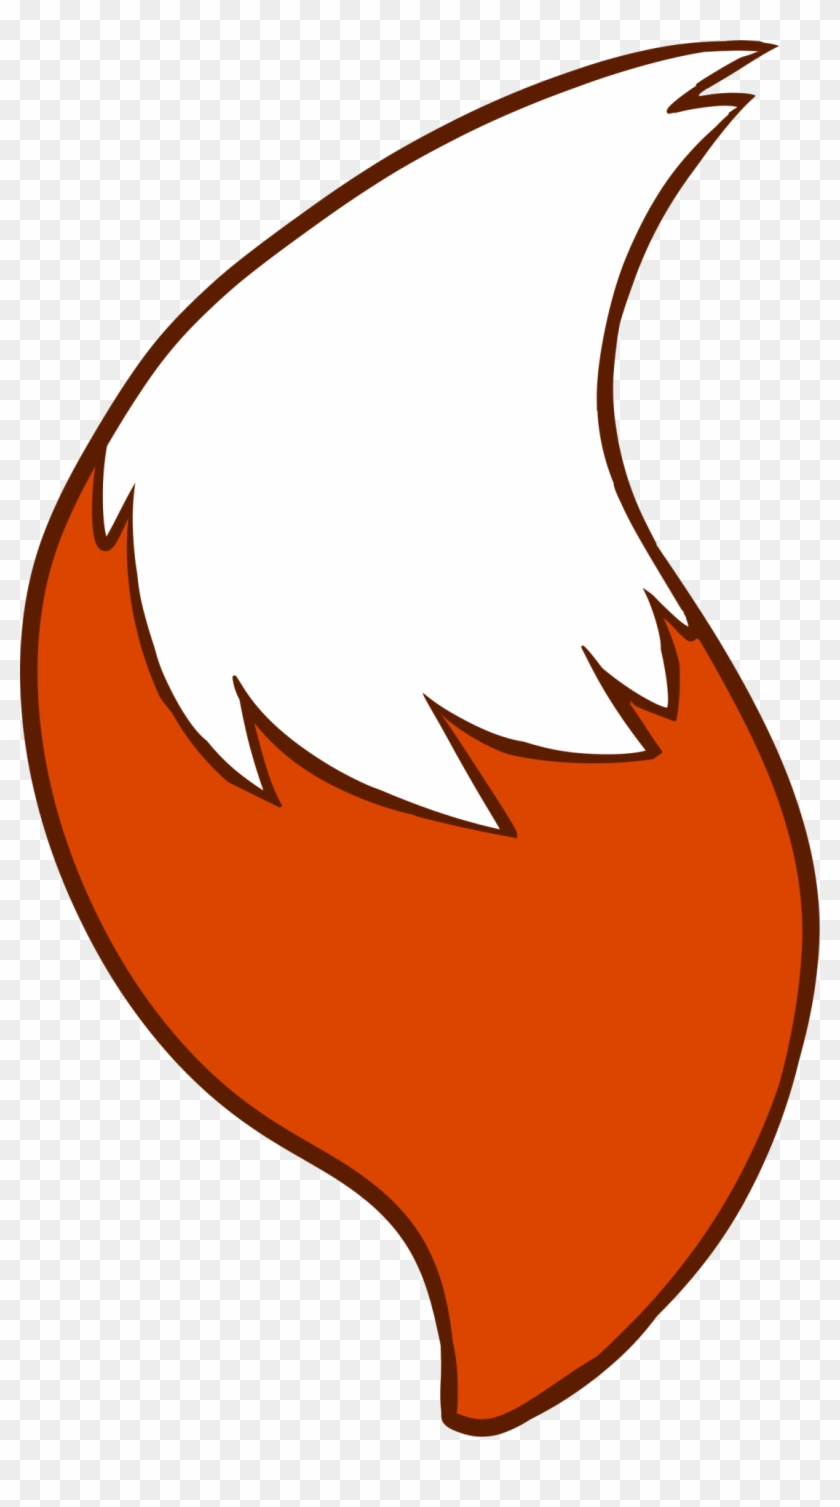 I Made Some Cute Little Fox Tail Stickers - Fox Tail Transparent #306884